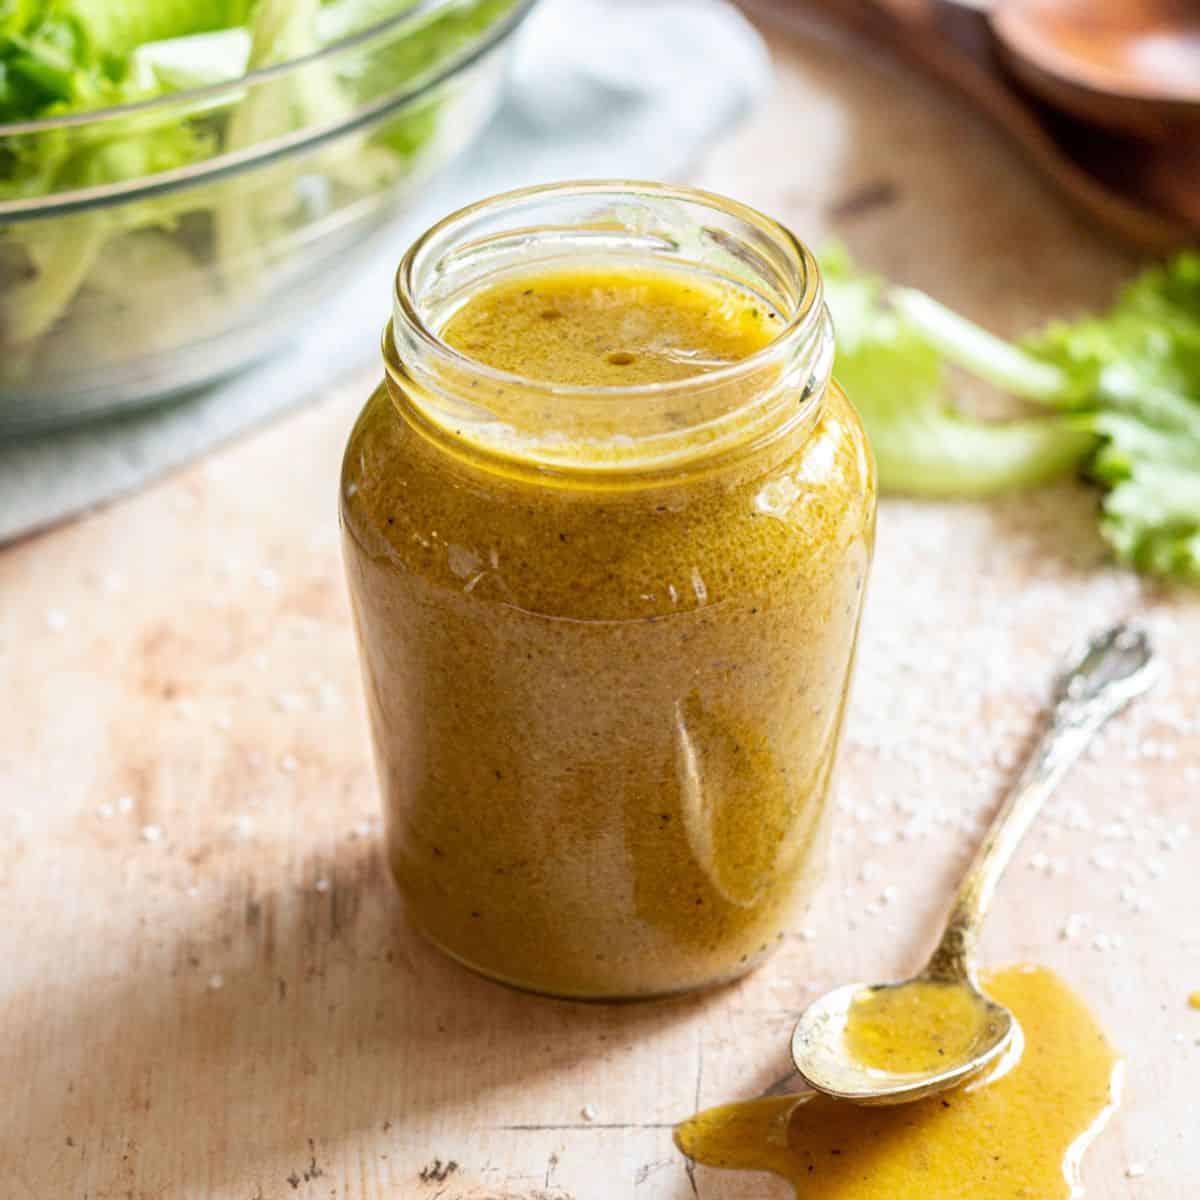 Maple Dijon Vinaigrette in a small glass jar with a spoon and some spilled dressing on the side, salad leaves in the background.